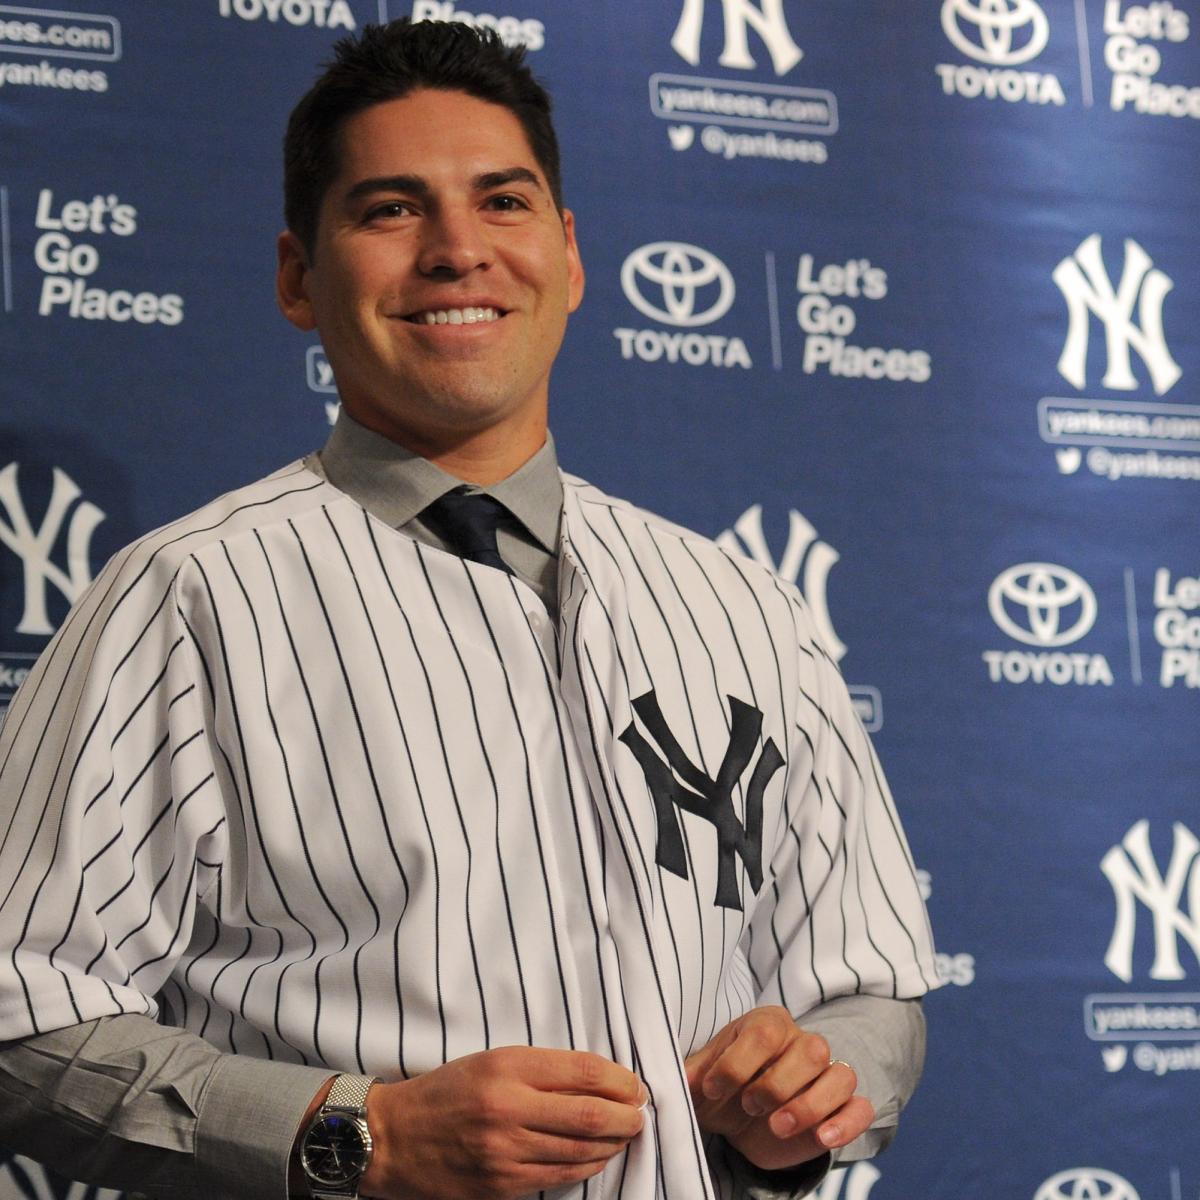 New York Yankees Really Didn't Need to Sign Jacoby Ellsbury